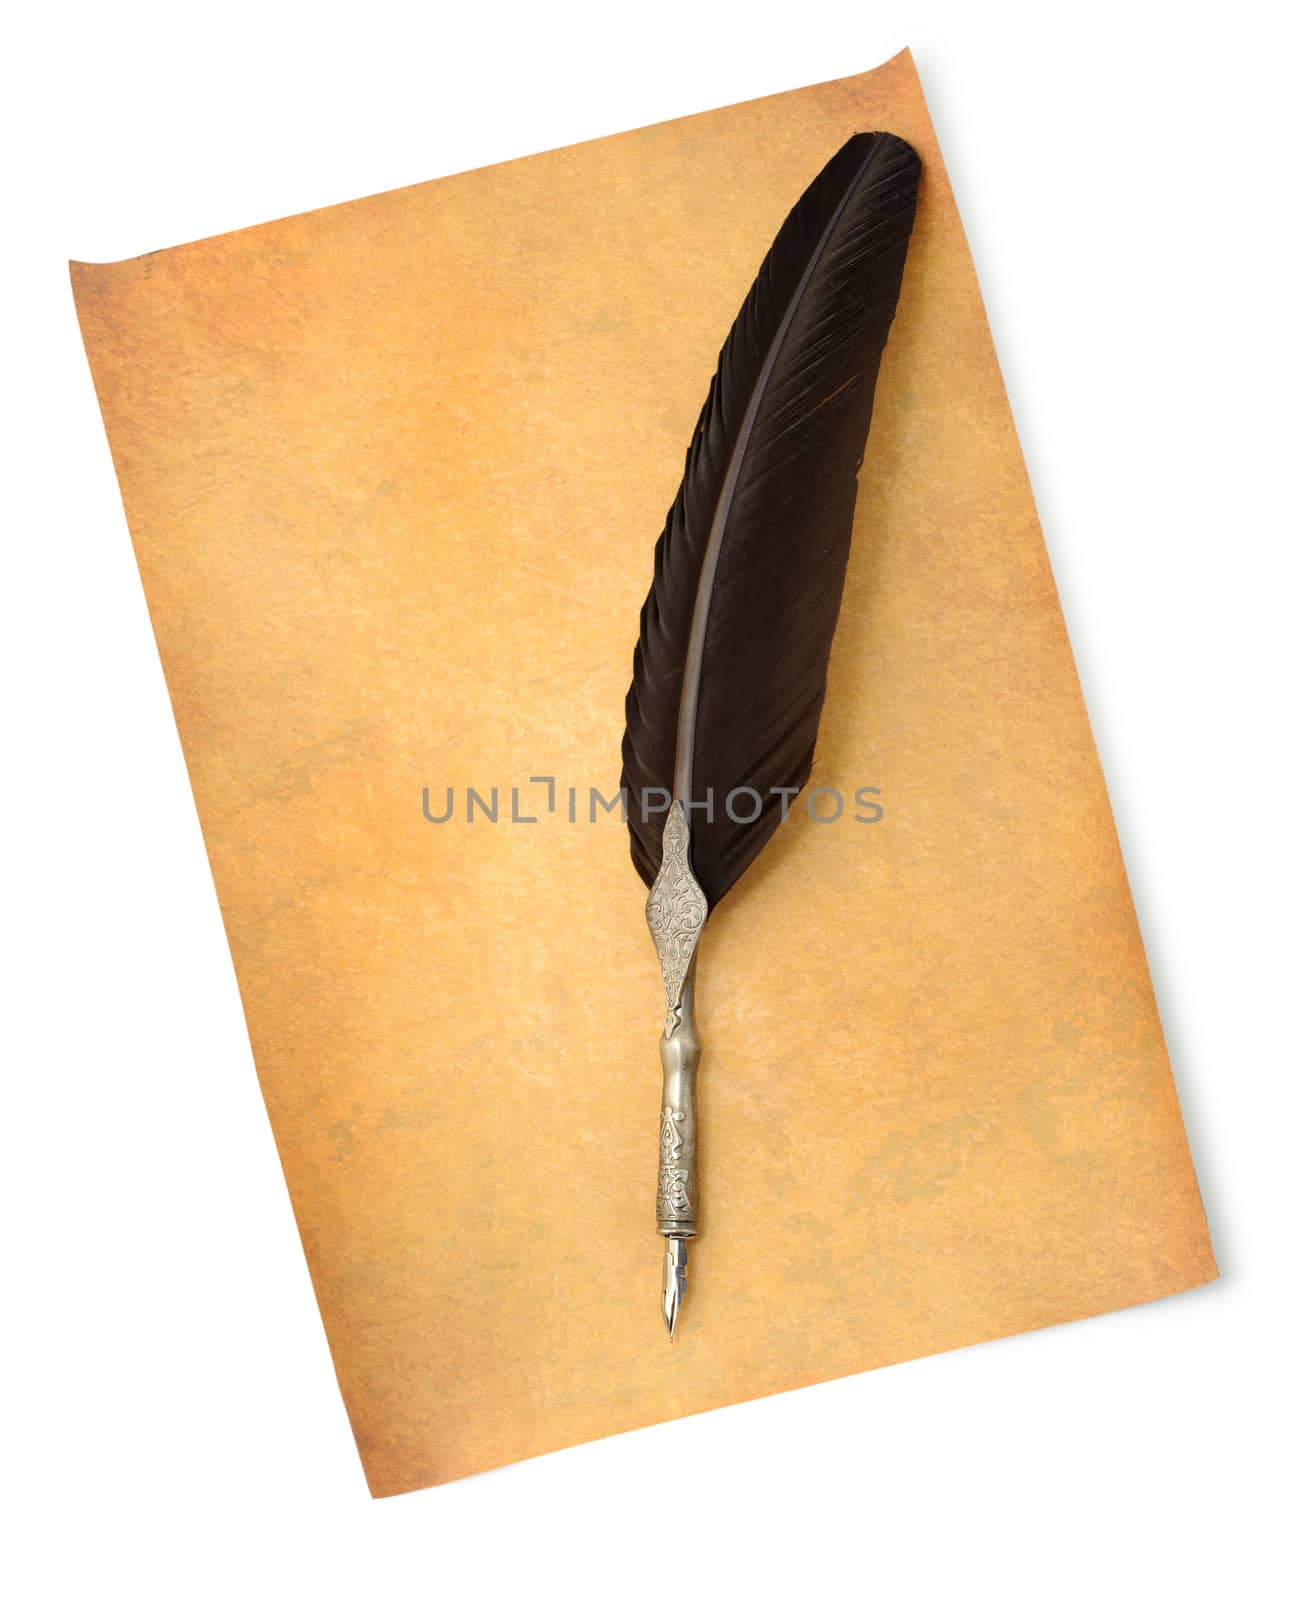 Feather quill an old paper by galdzer